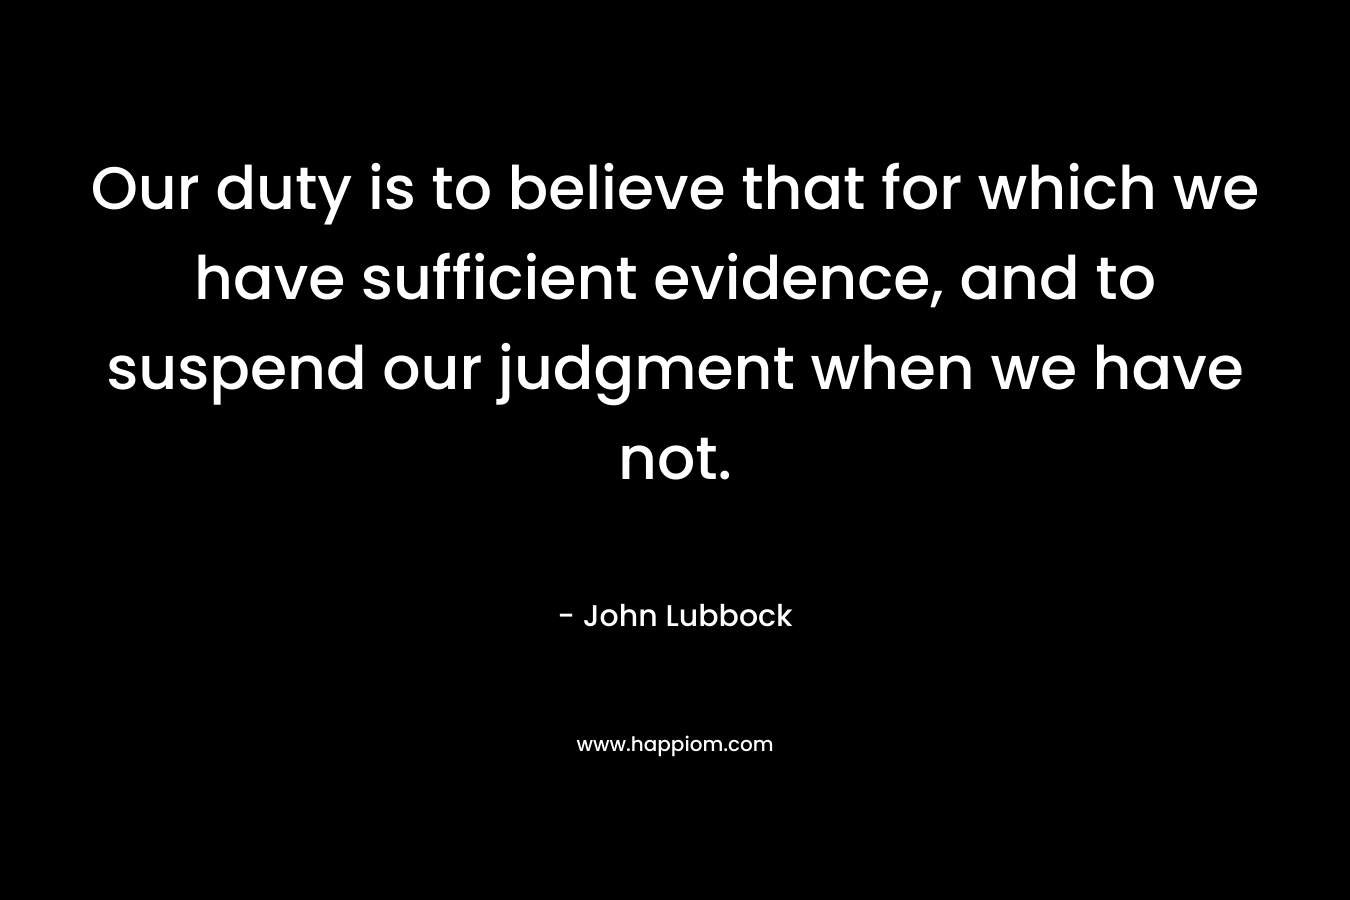 Our duty is to believe that for which we have sufficient evidence, and to suspend our judgment when we have not. – John Lubbock